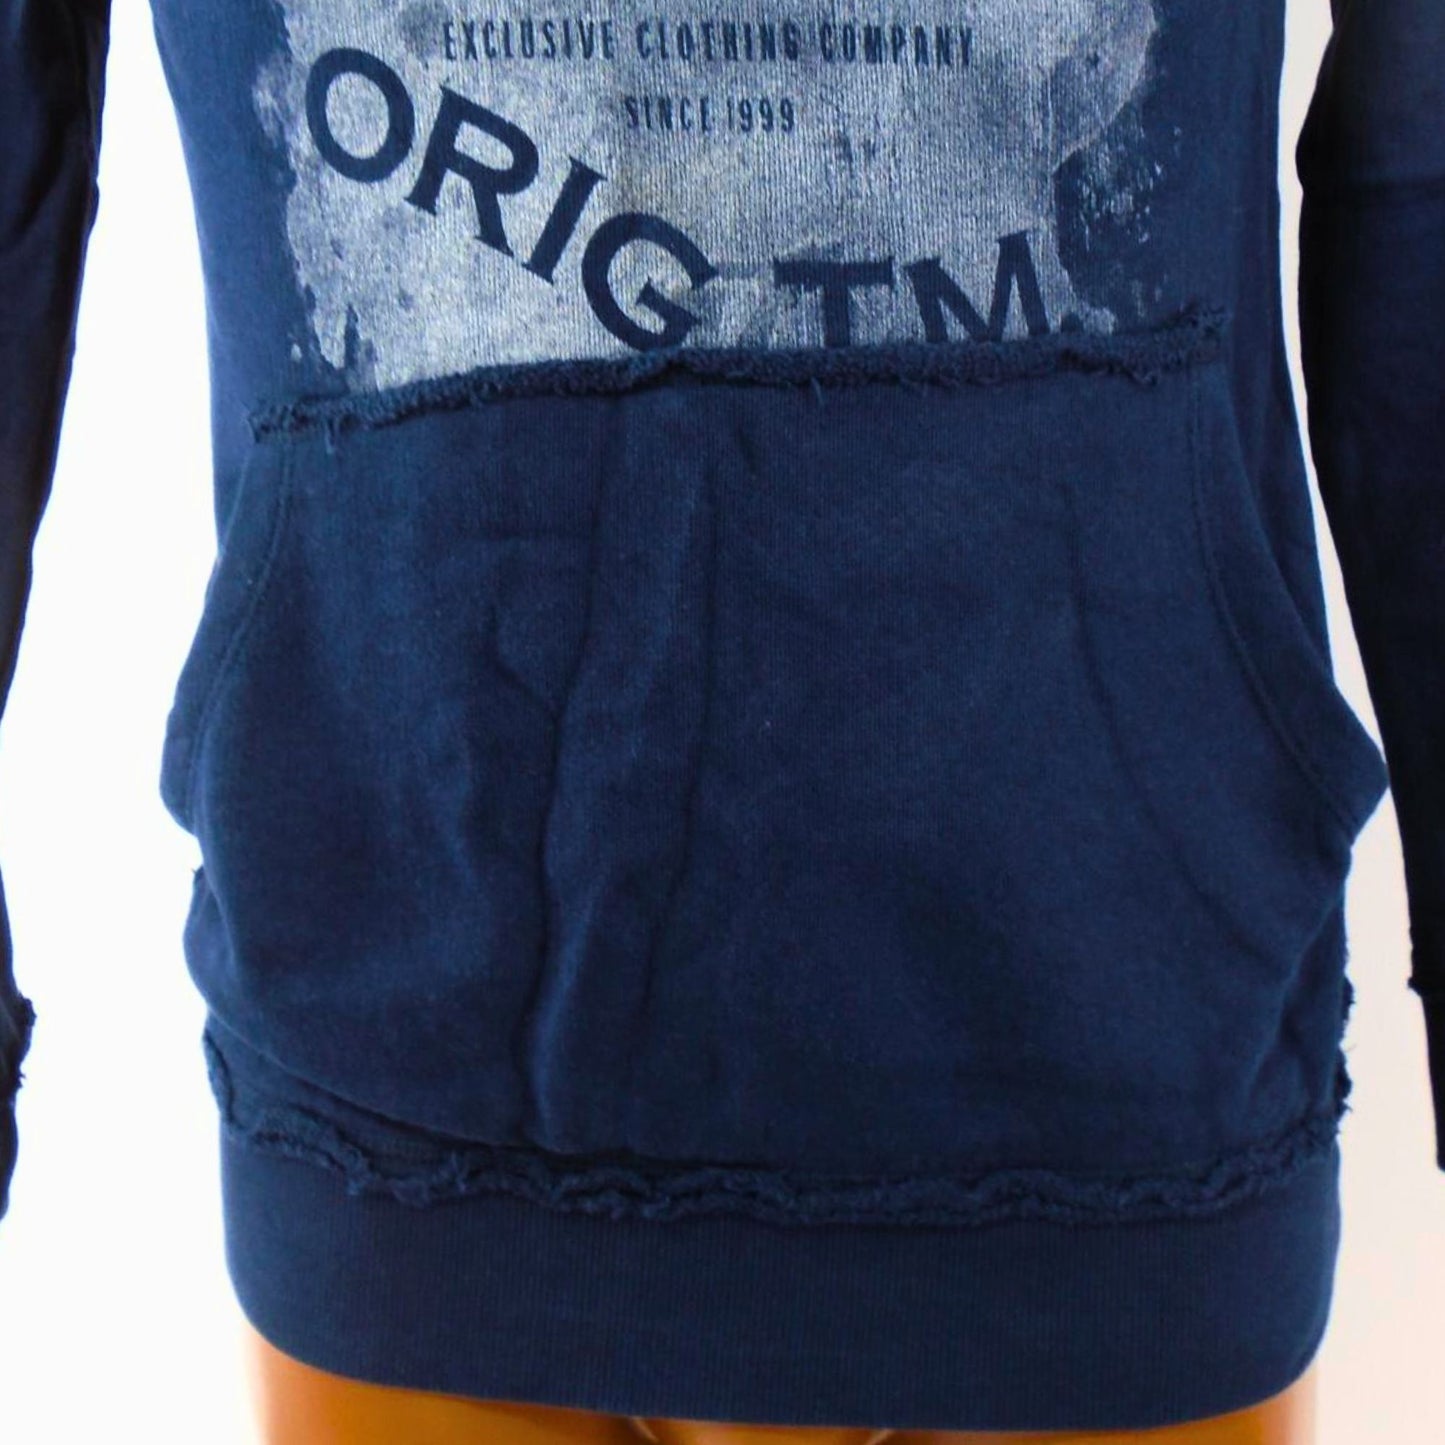 SMOG Women's Hoodie in Dark Blue, Size XS: Used in Good Condition